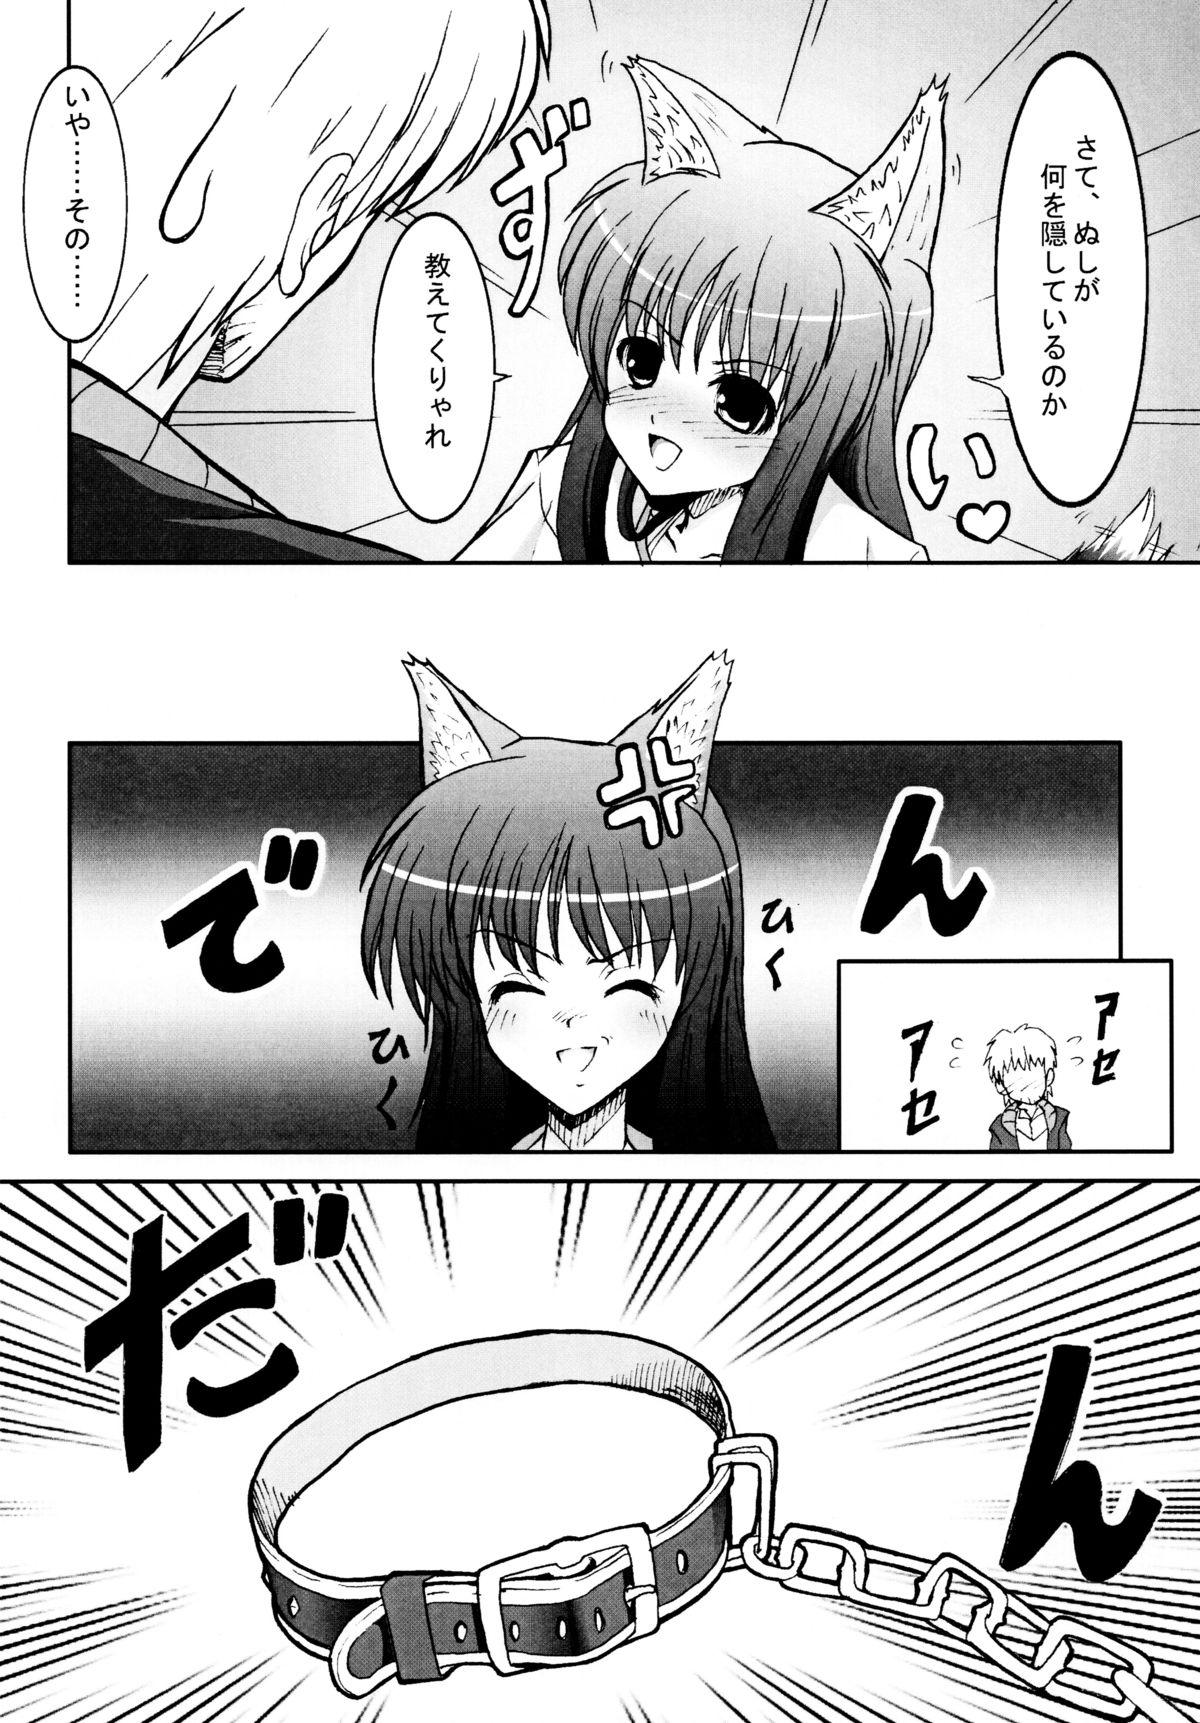 Shecock Ookami to Ai no Kusari - Spice and wolf Mmf - Page 6